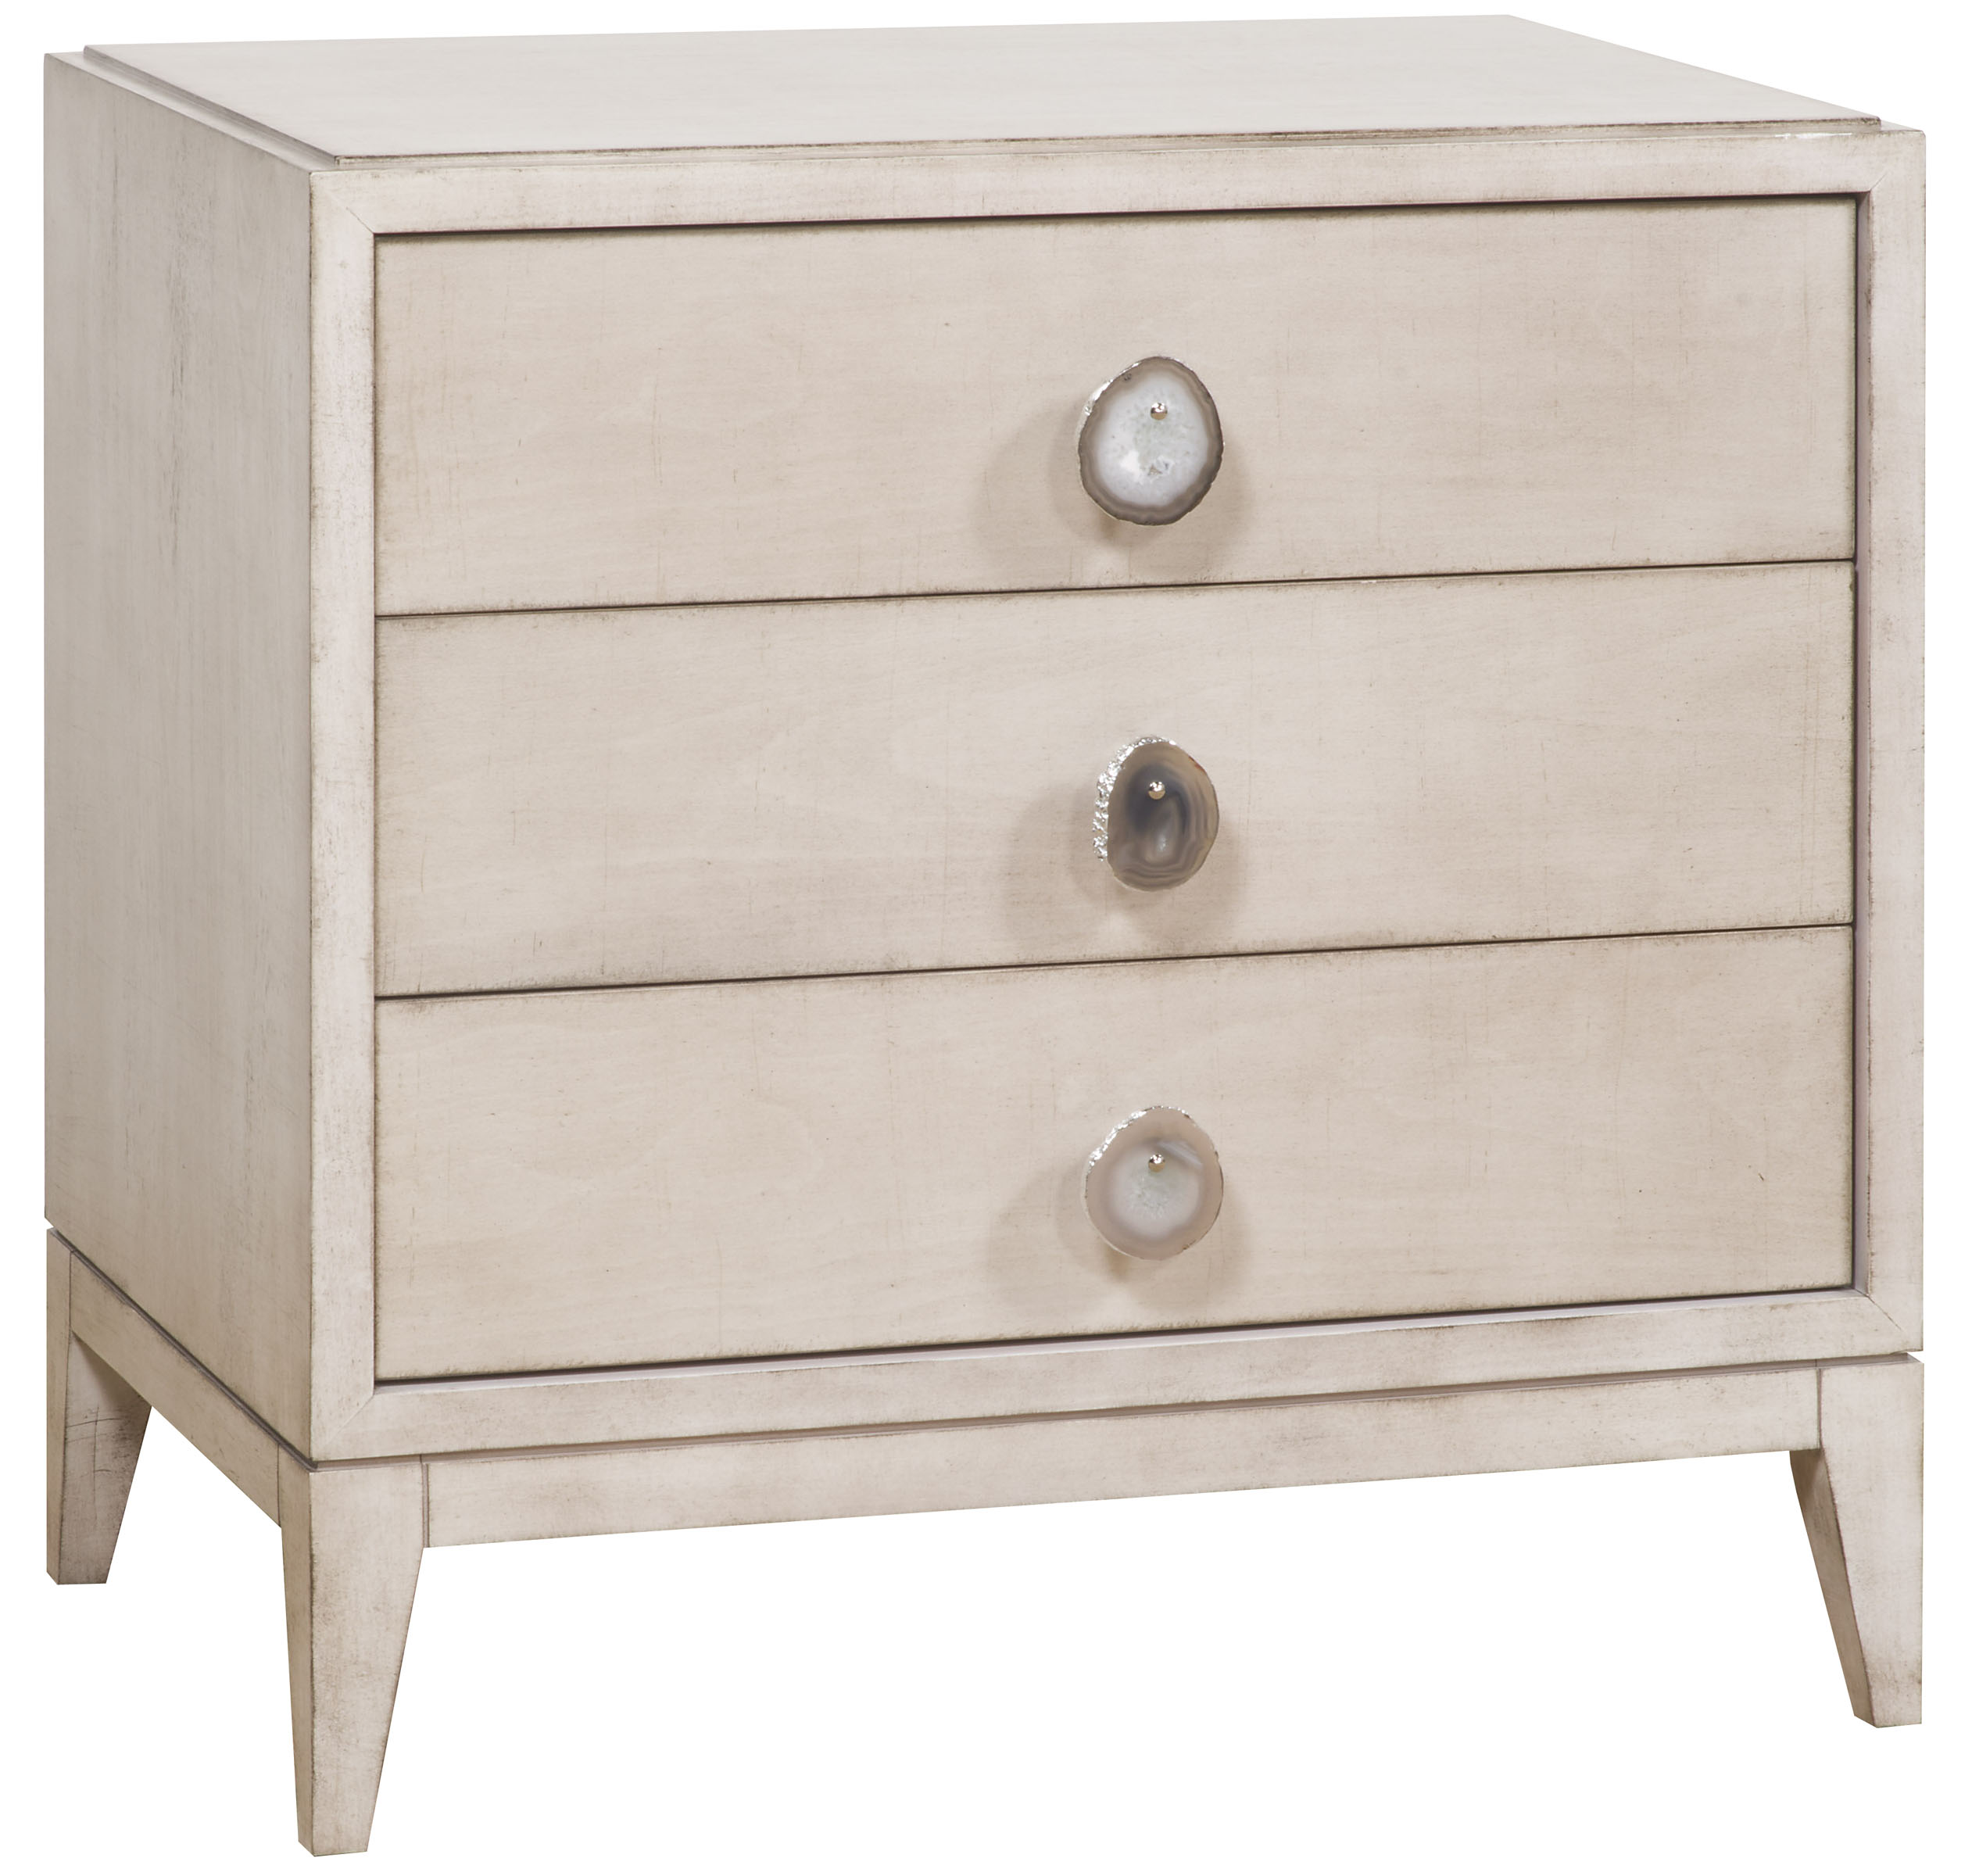 Cremins Nightstand CC09A - Our Products - Vanguard Furniture